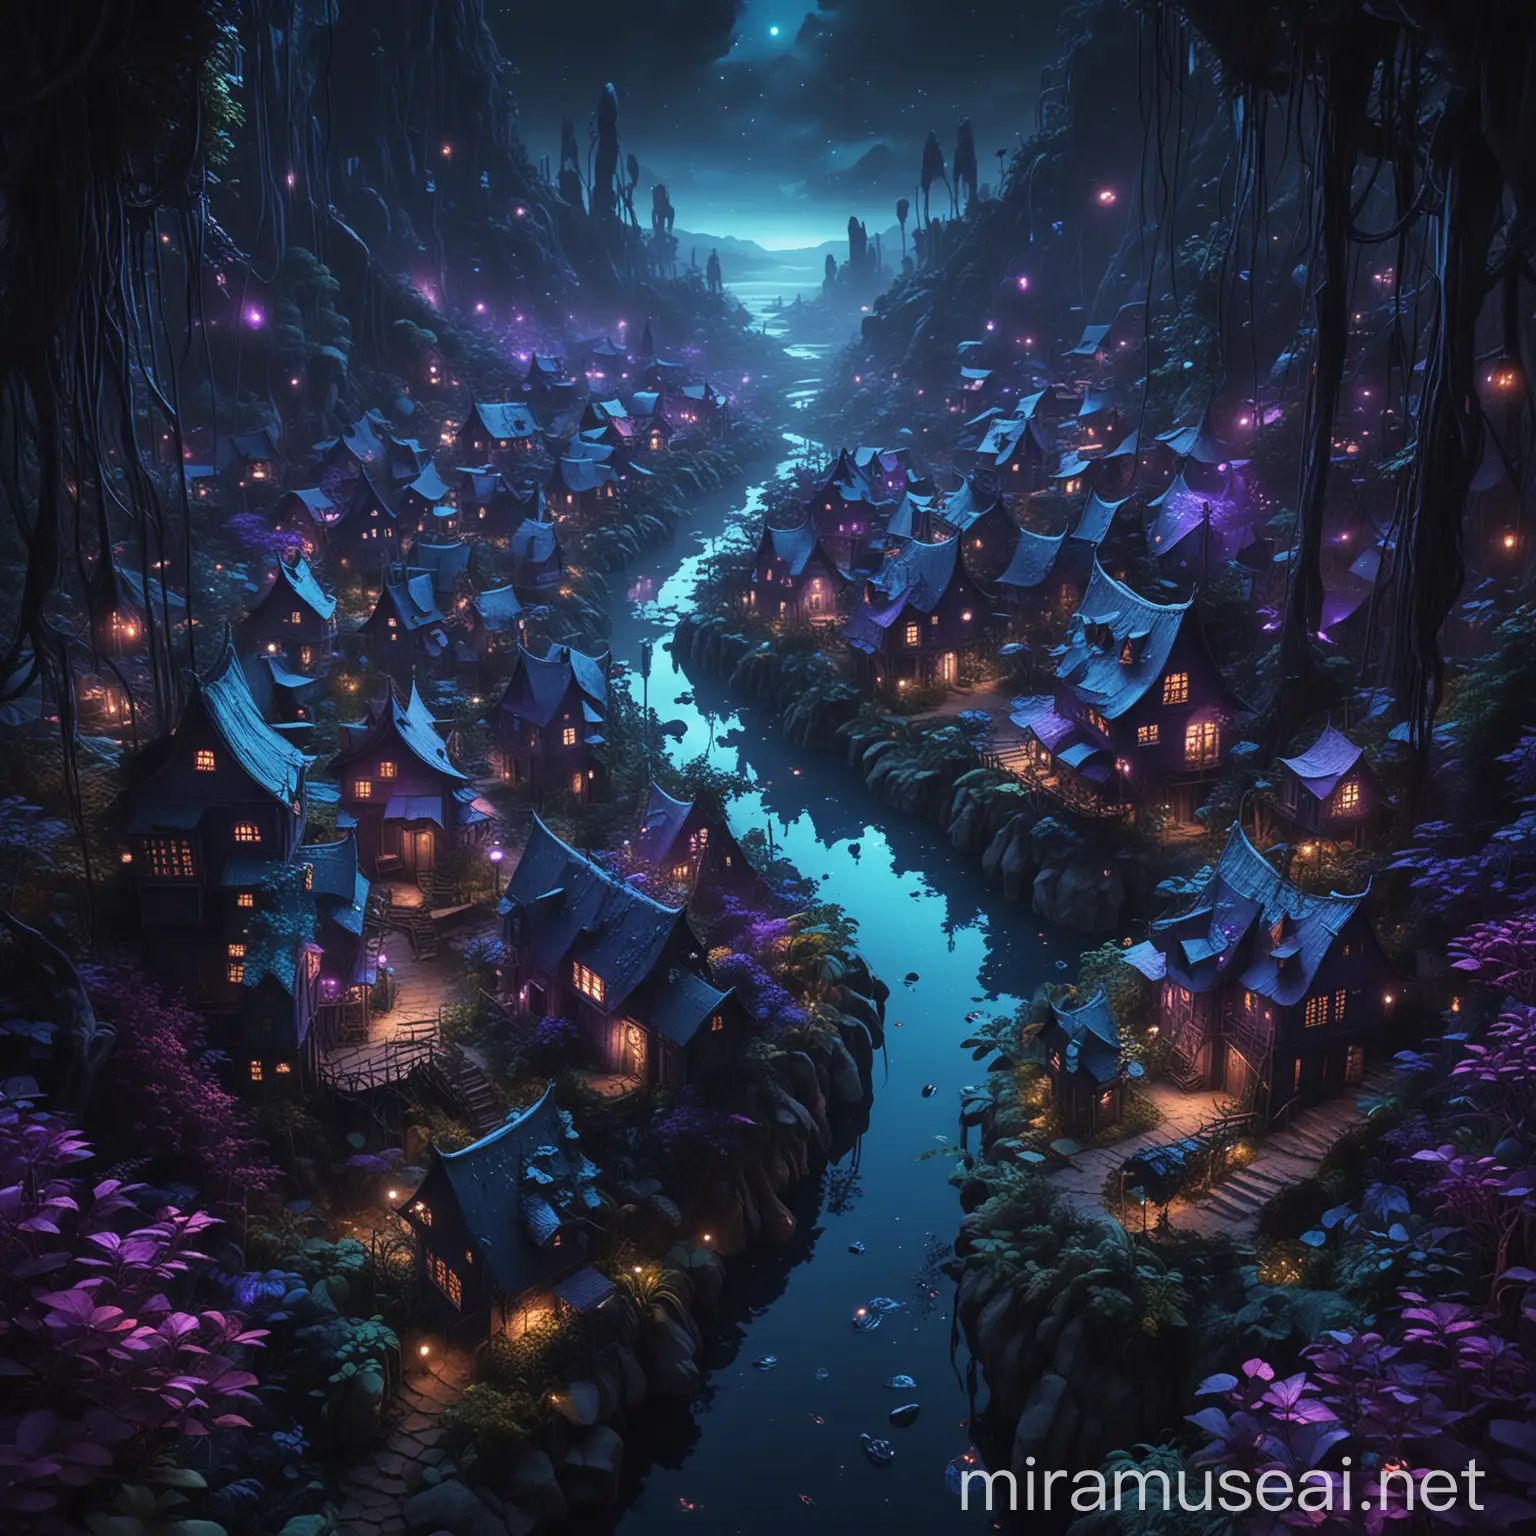 Dark Fantasy Village with Bioluminescent Plants and Fantasy Houses